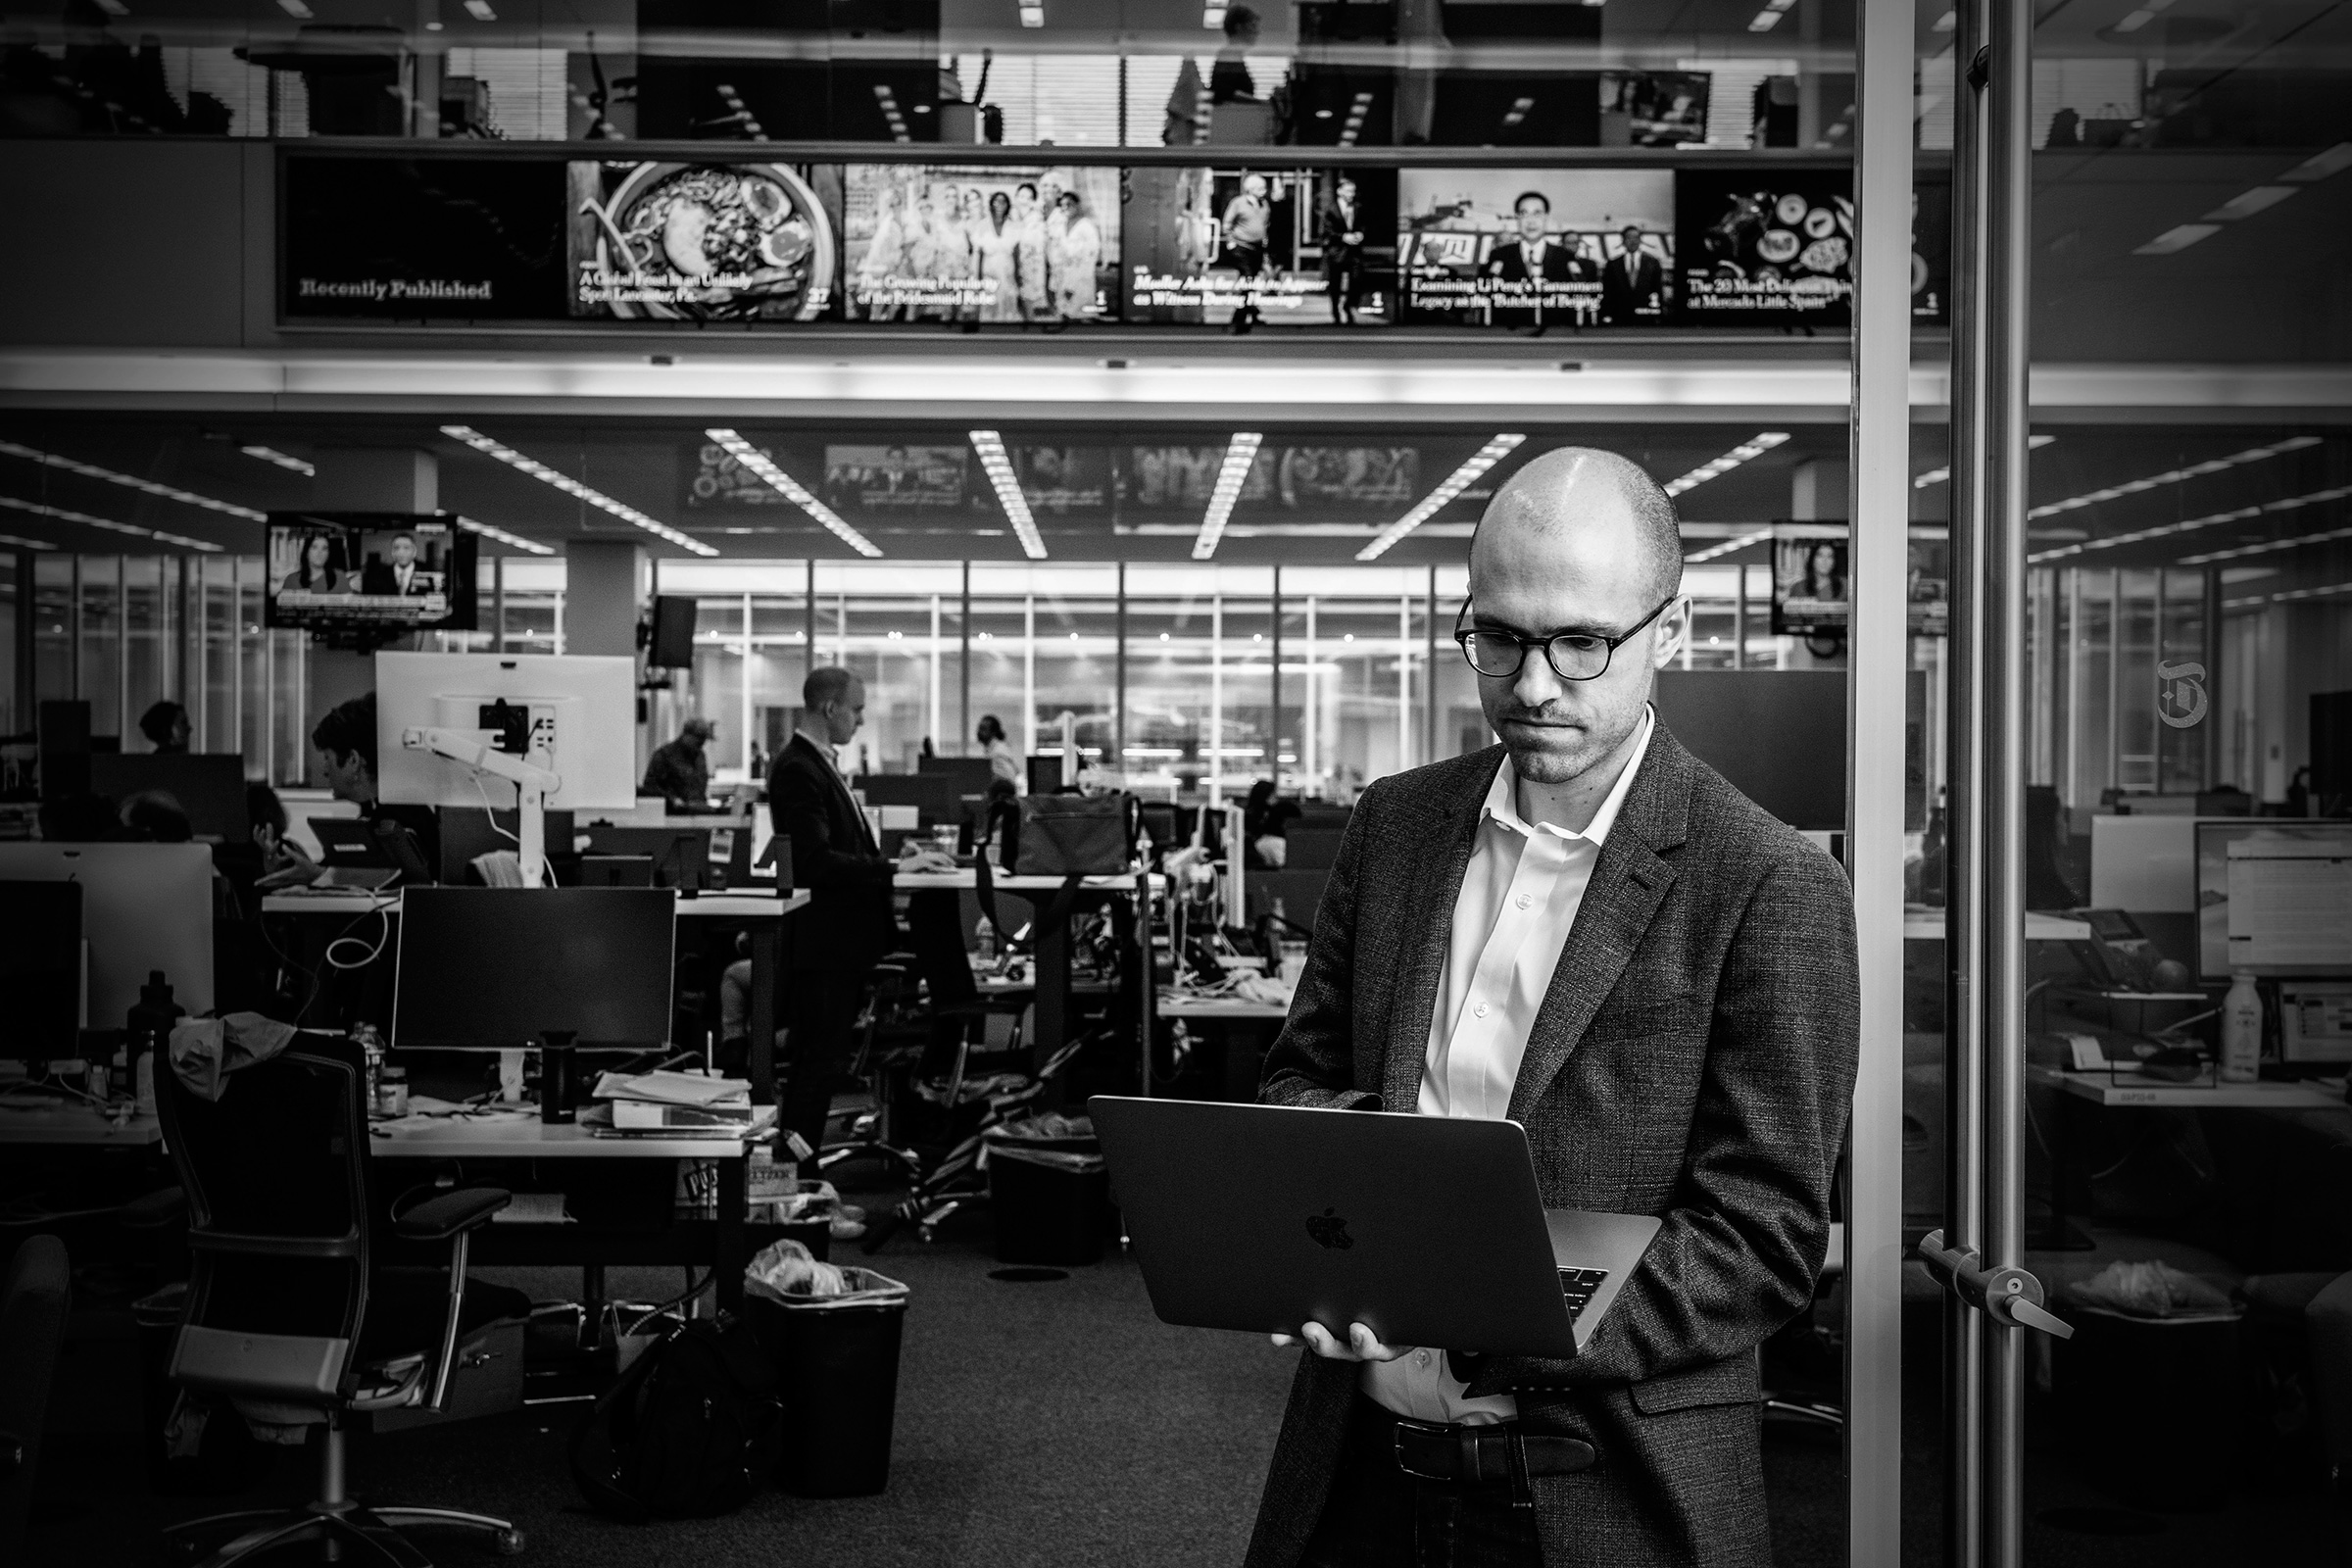 New York Times publisher A.G. Sulzberger in the newsroom (Mark Peterson—Redux for TIME)